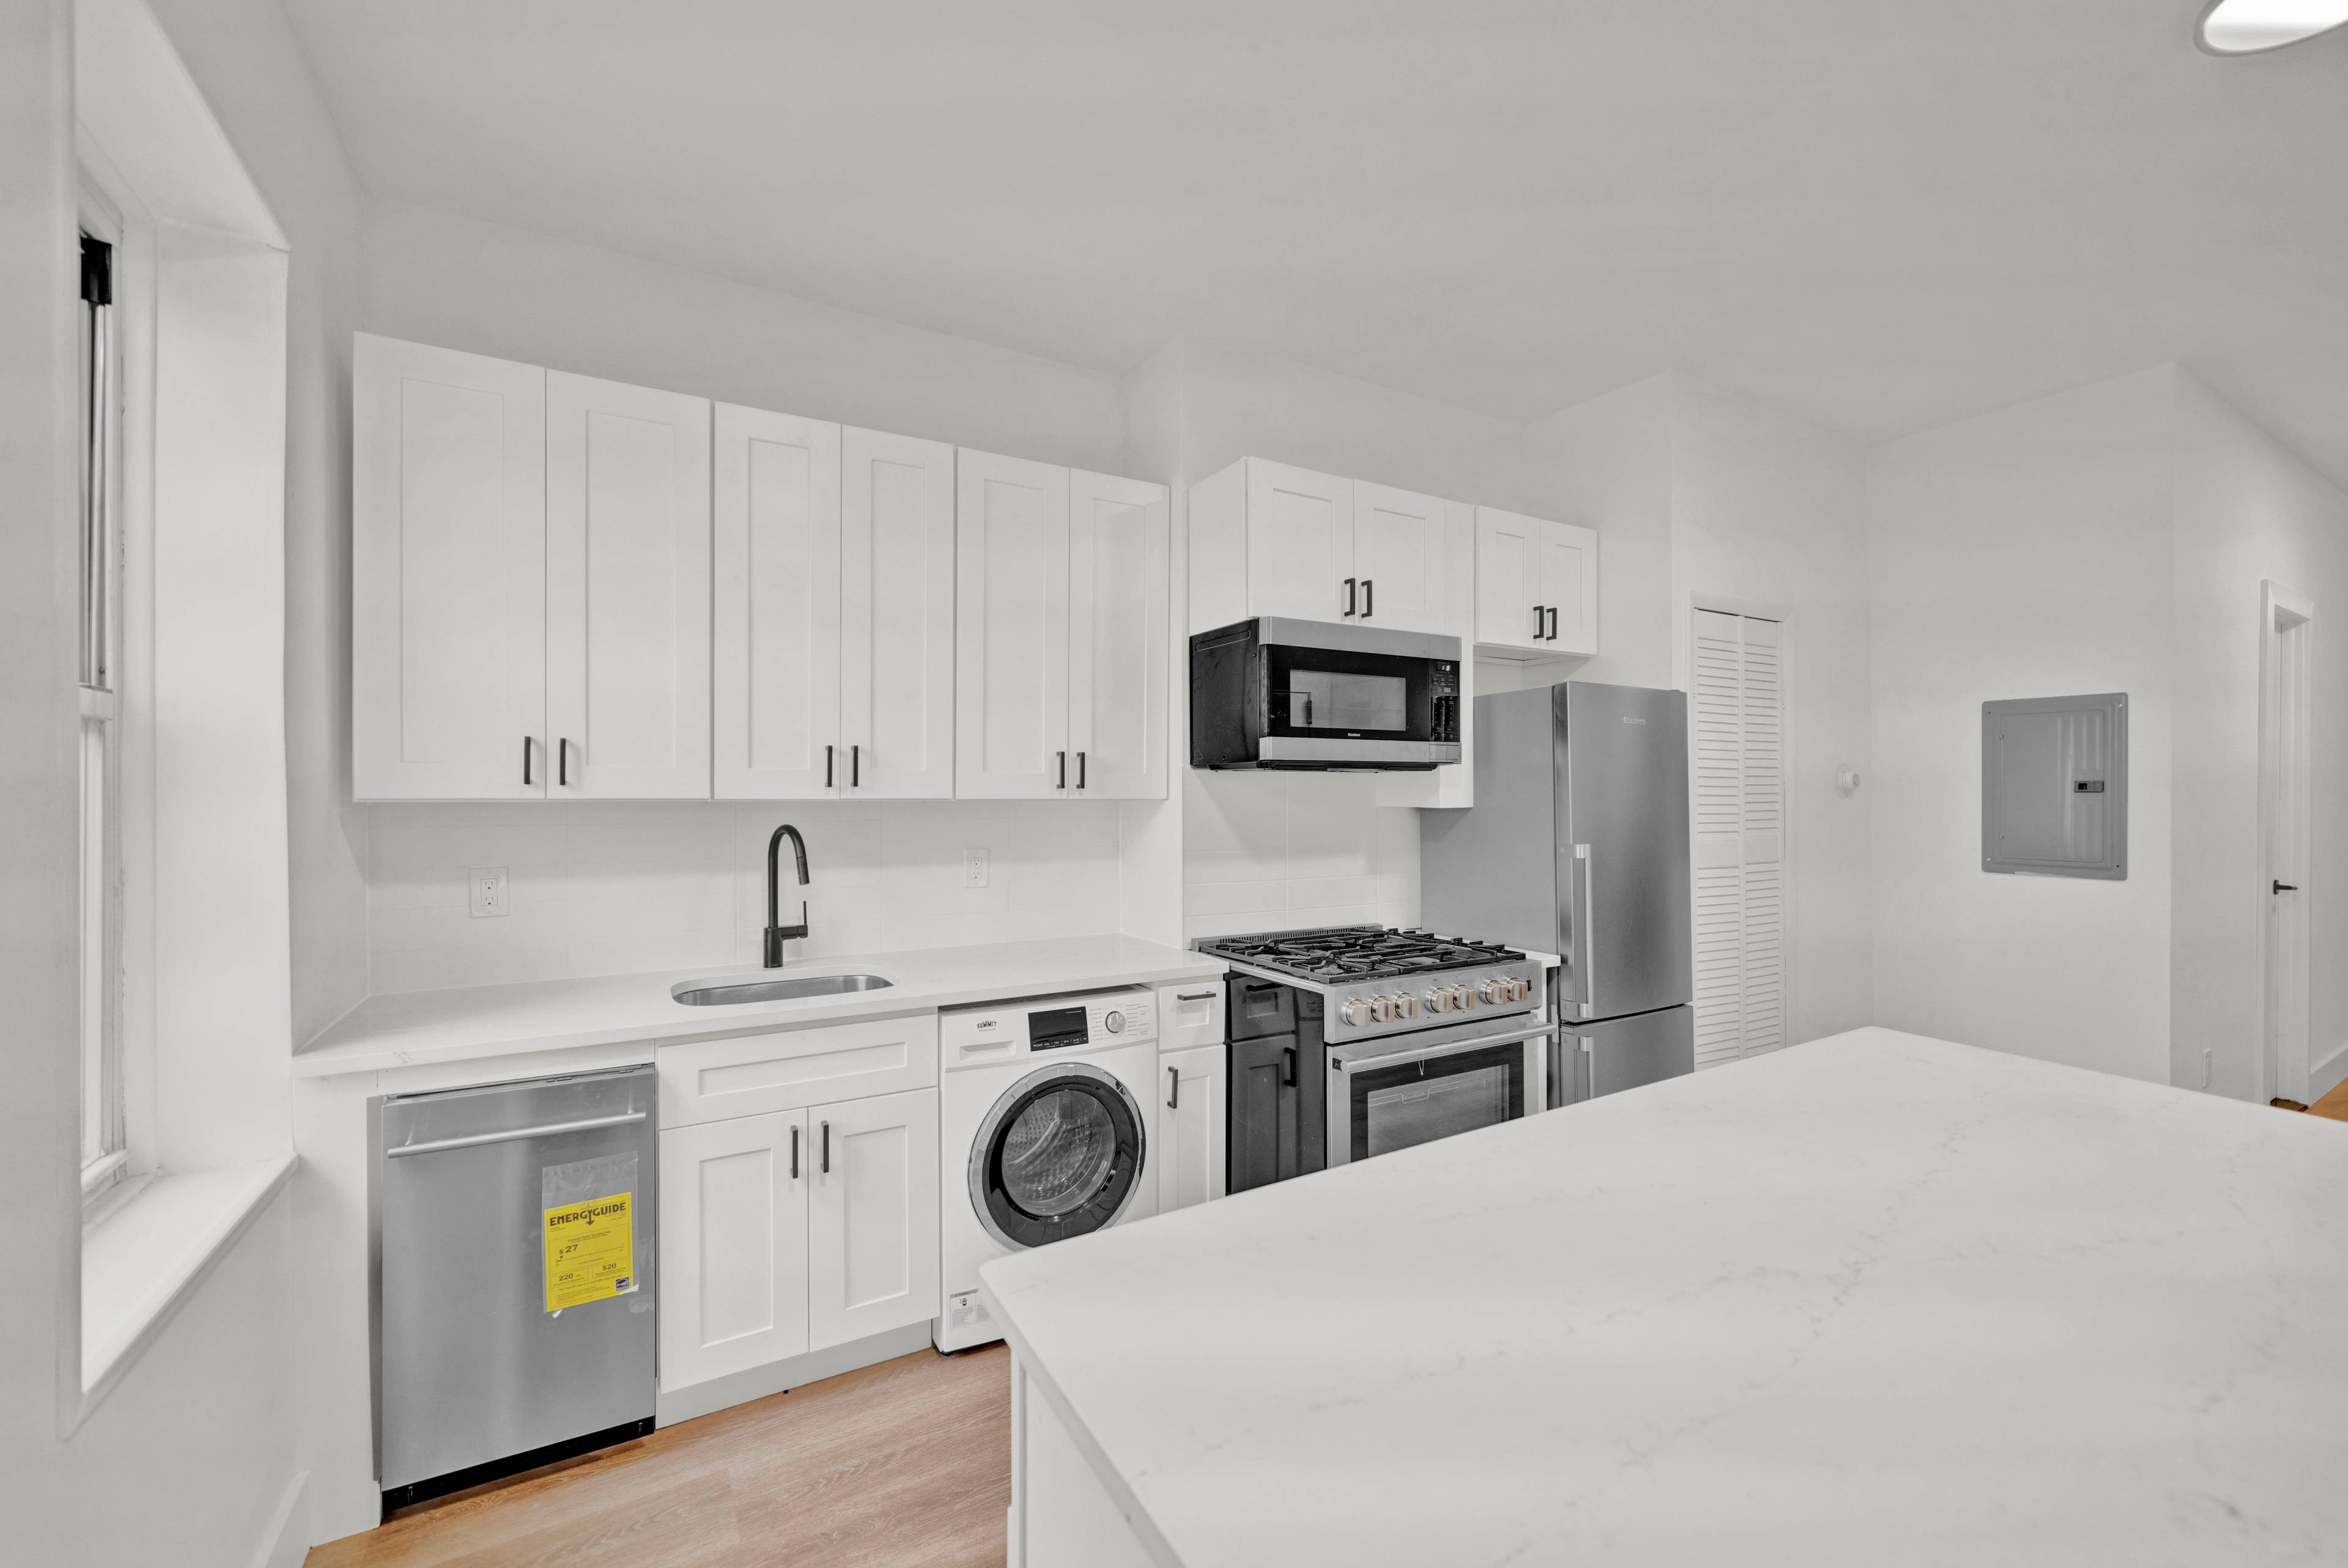 Sprawling Full Floor 1BR Apartment located in Downtown Hoboken NJ W/ Extra Home Office/Walk in Closet!  Shared Backyard and Extra Laundry Room On Site.  Virtual Doorman System!